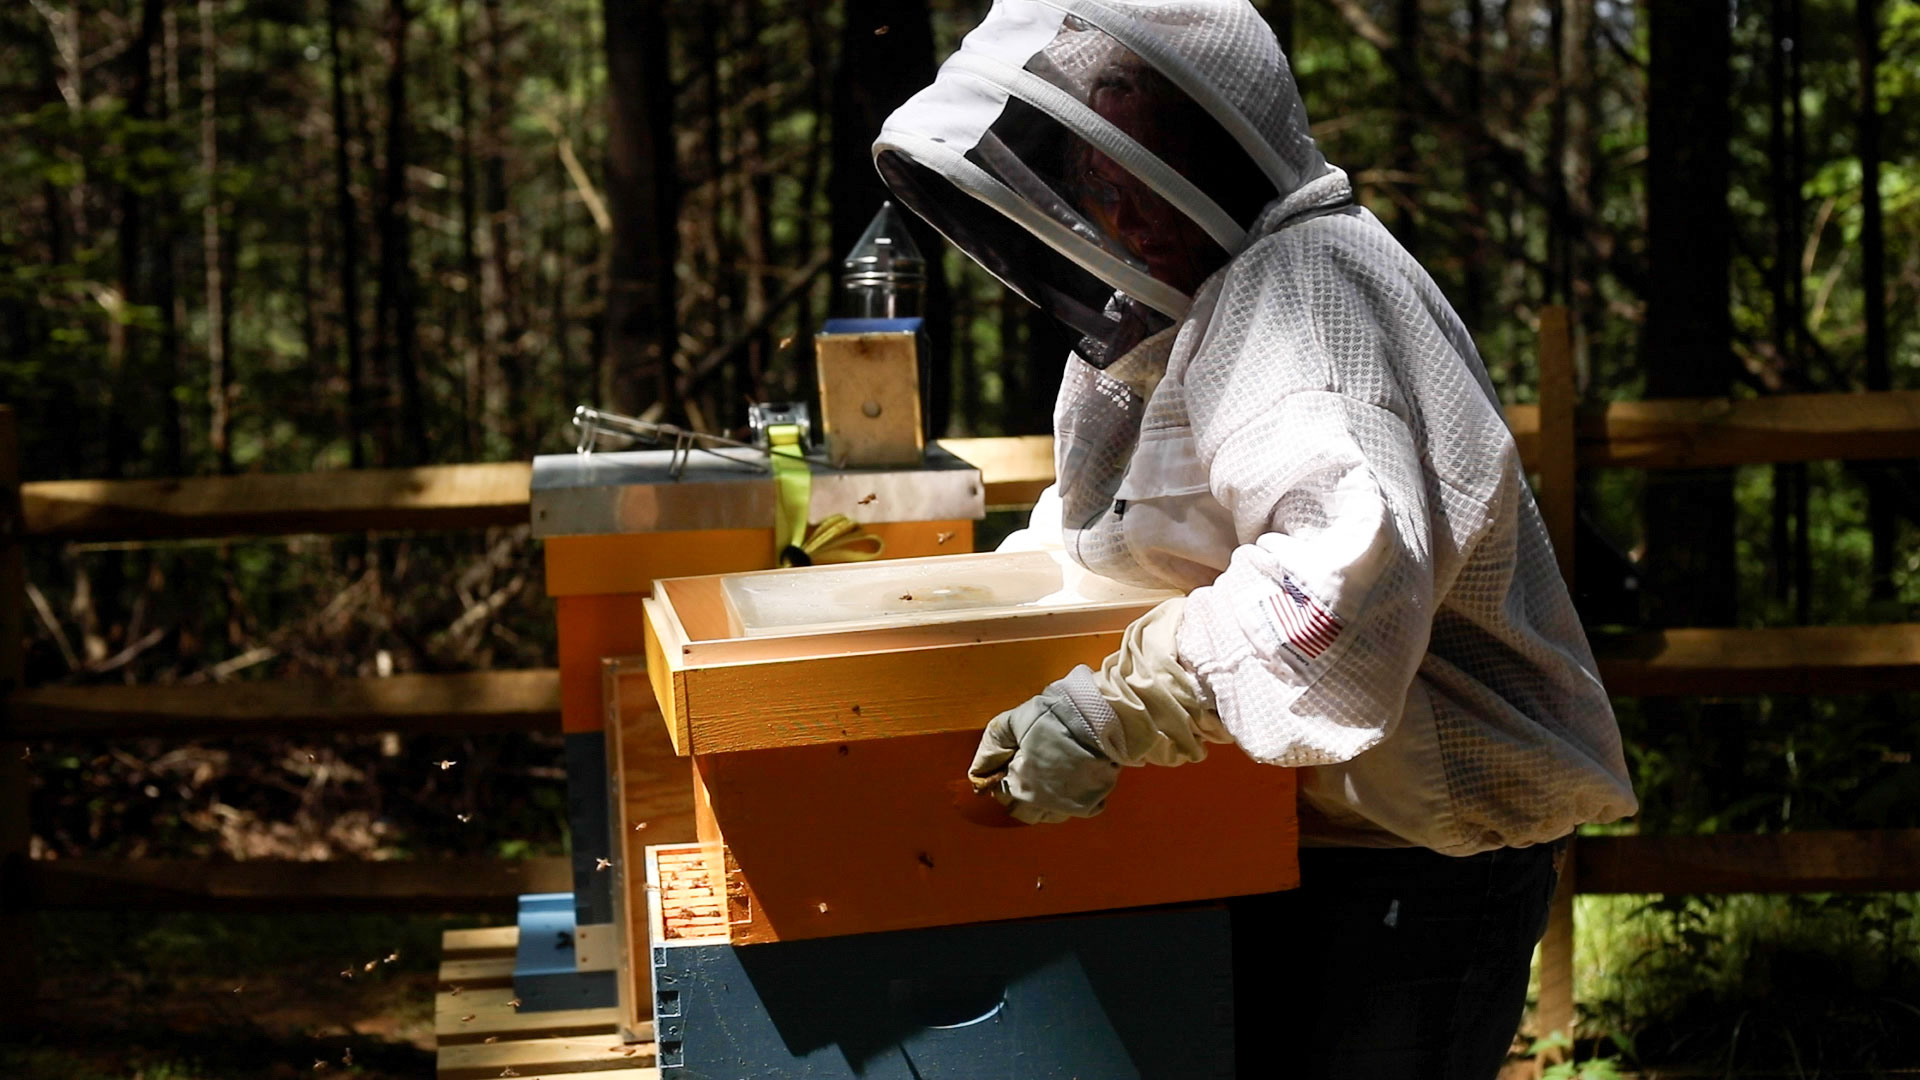 Woman in a beekeeper's outfit pulls up a wooden box holding a hive